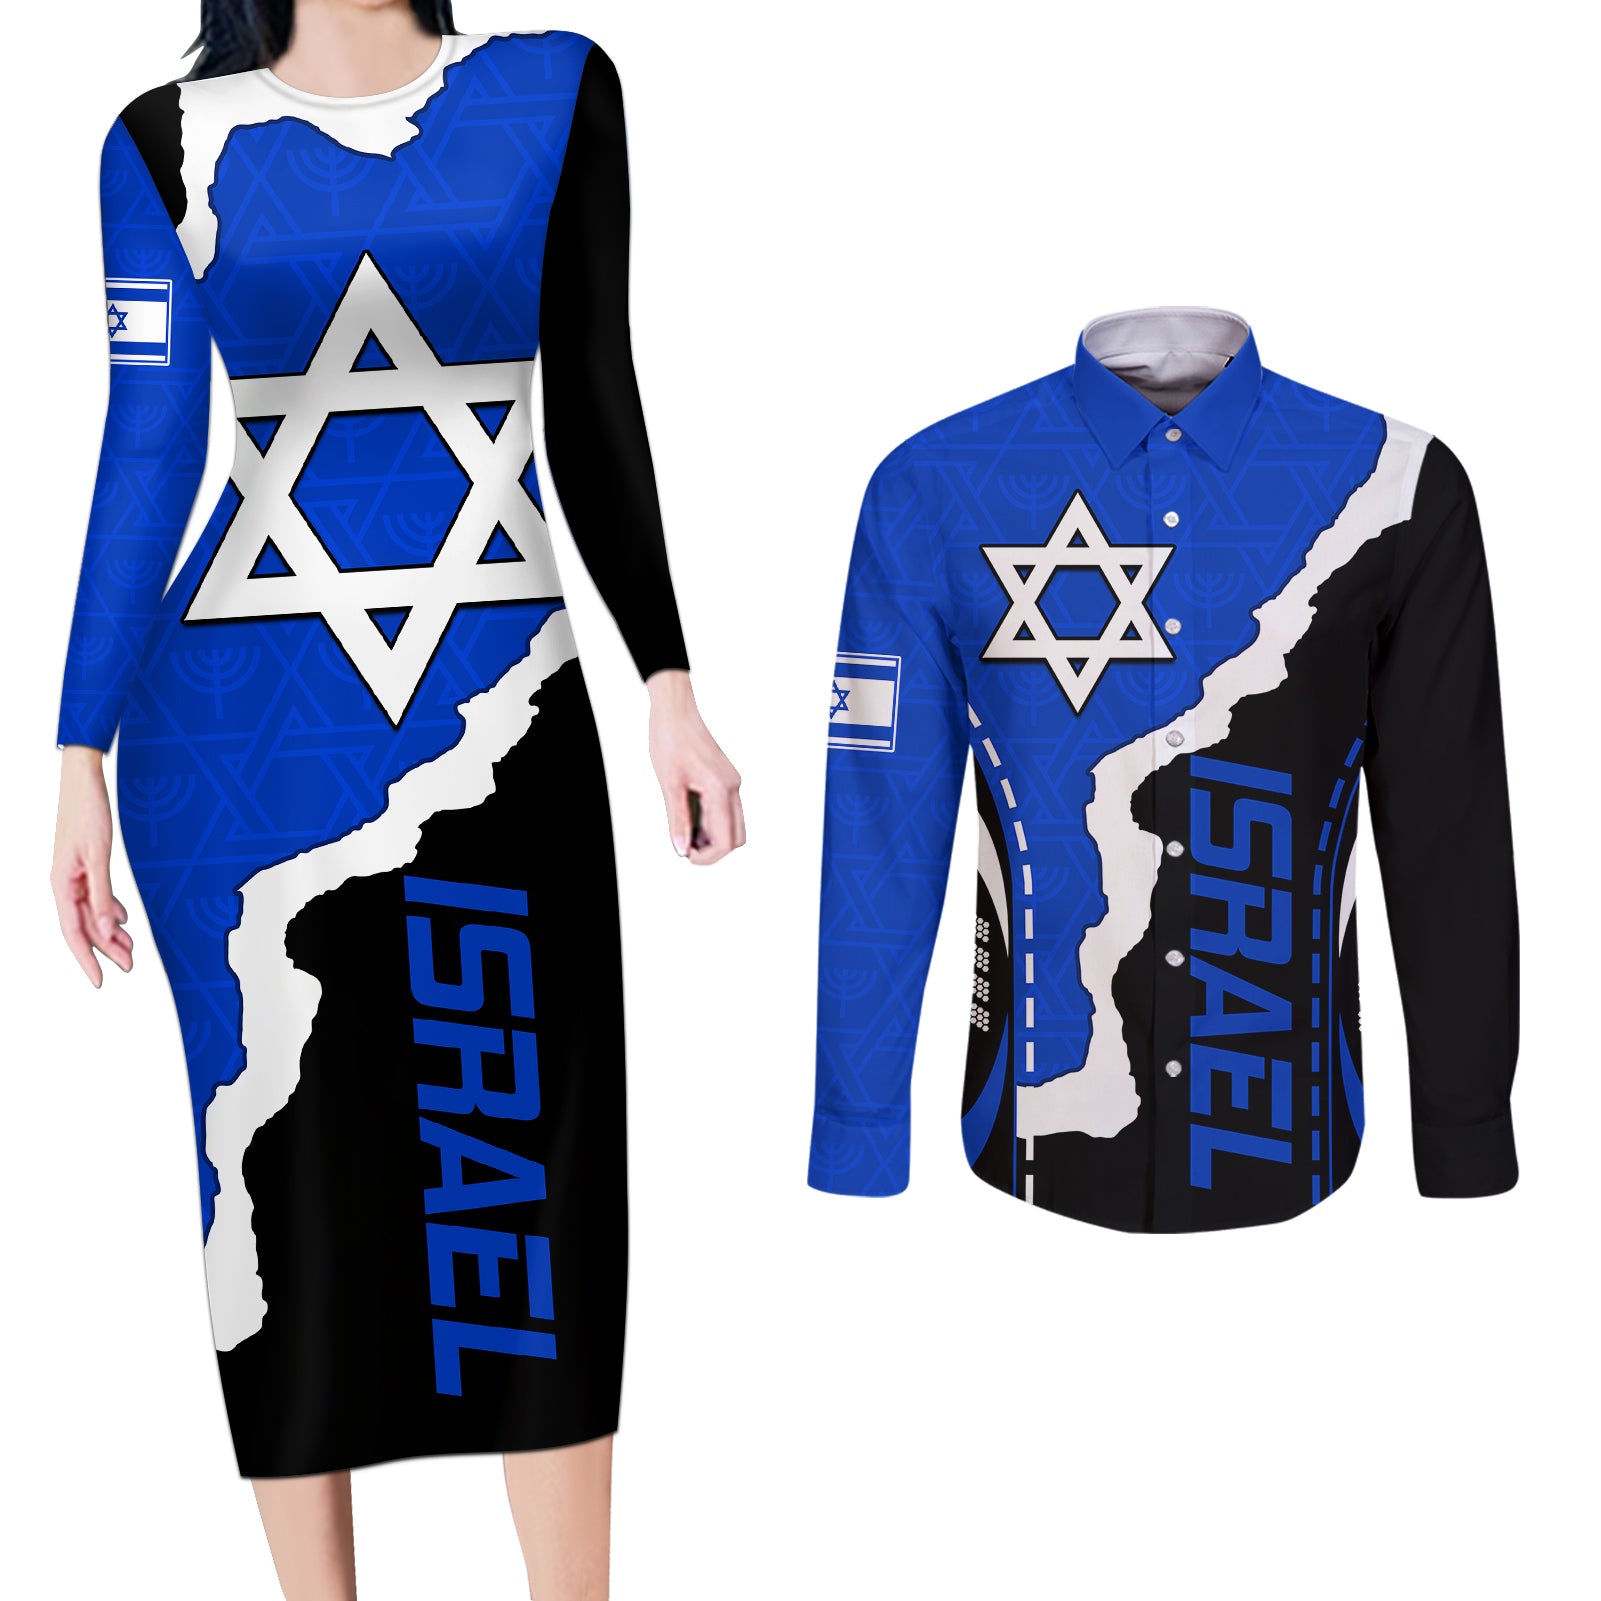 israel-couples-matching-long-sleeve-bodycon-dress-and-long-sleeve-button-shirts-stars-of-david-sporty-style